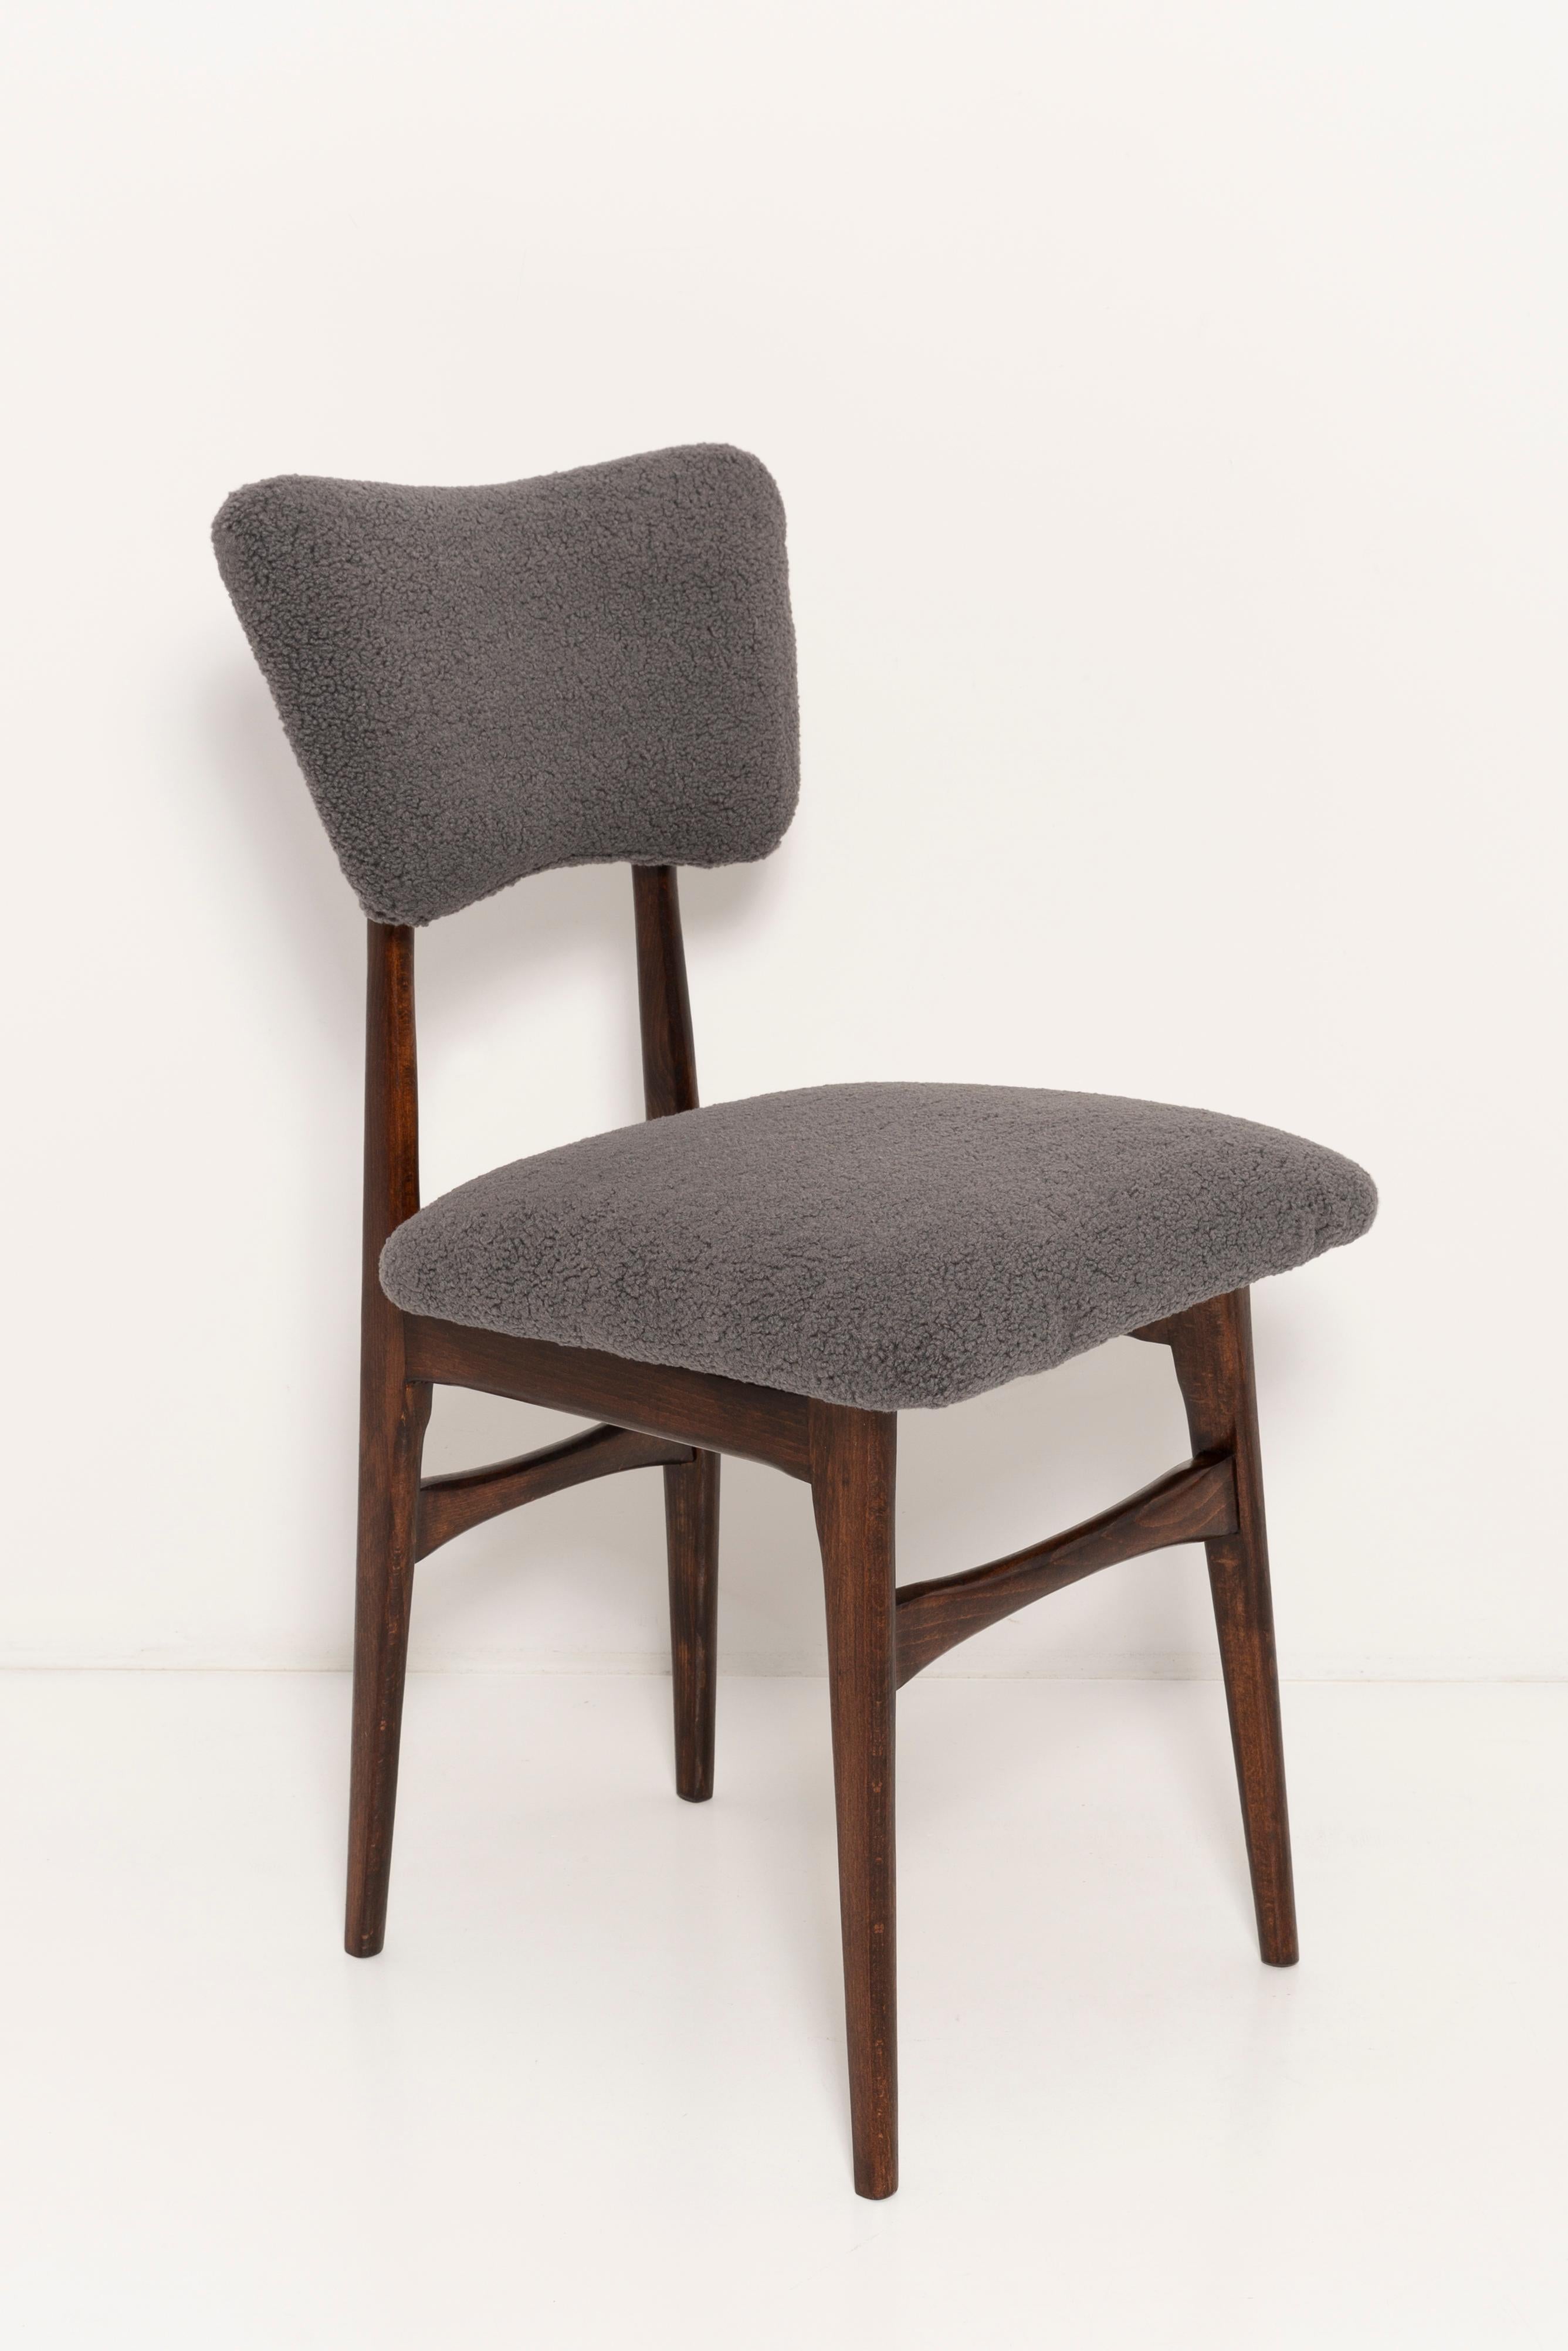 Chair designed by Prof. Rajmund Halas. Made of beechwood. Chair is after a complete upholstery renovation; the woodwork has been refreshed. Seat and back is dressed in dark gray (color 07), durable and pleasant to the touch bouclé fabric. Chair is